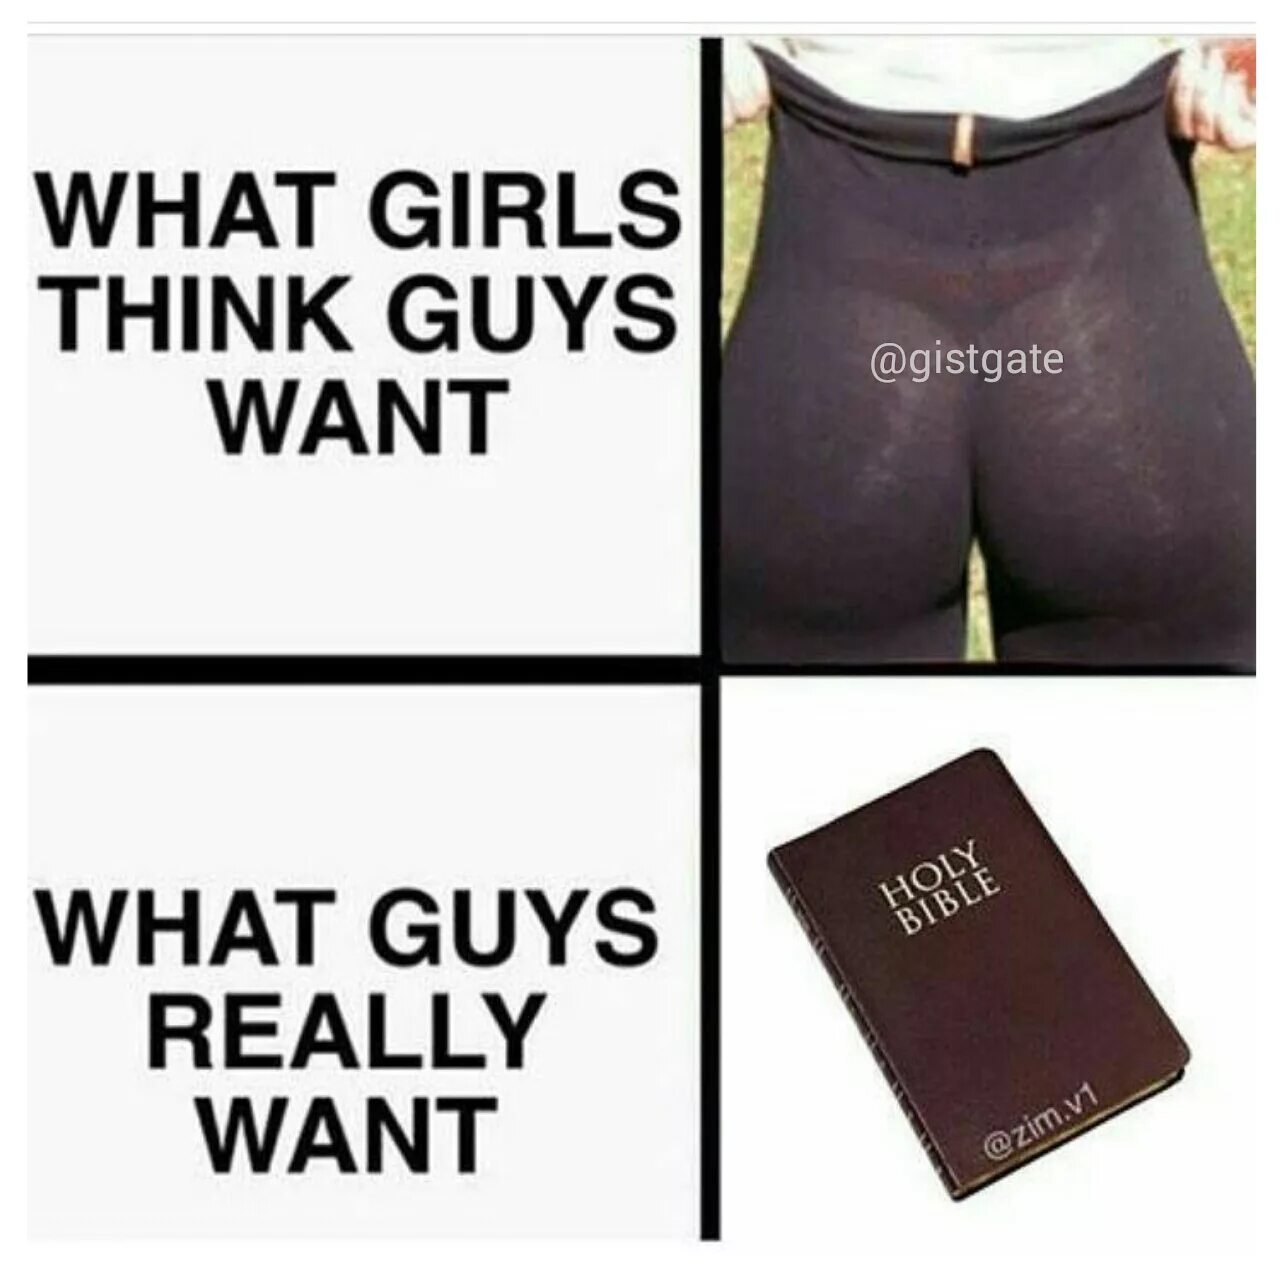 What guys really want. What girls think guys want. What you want одежда. What boys really want Мем. Tell me what do you see